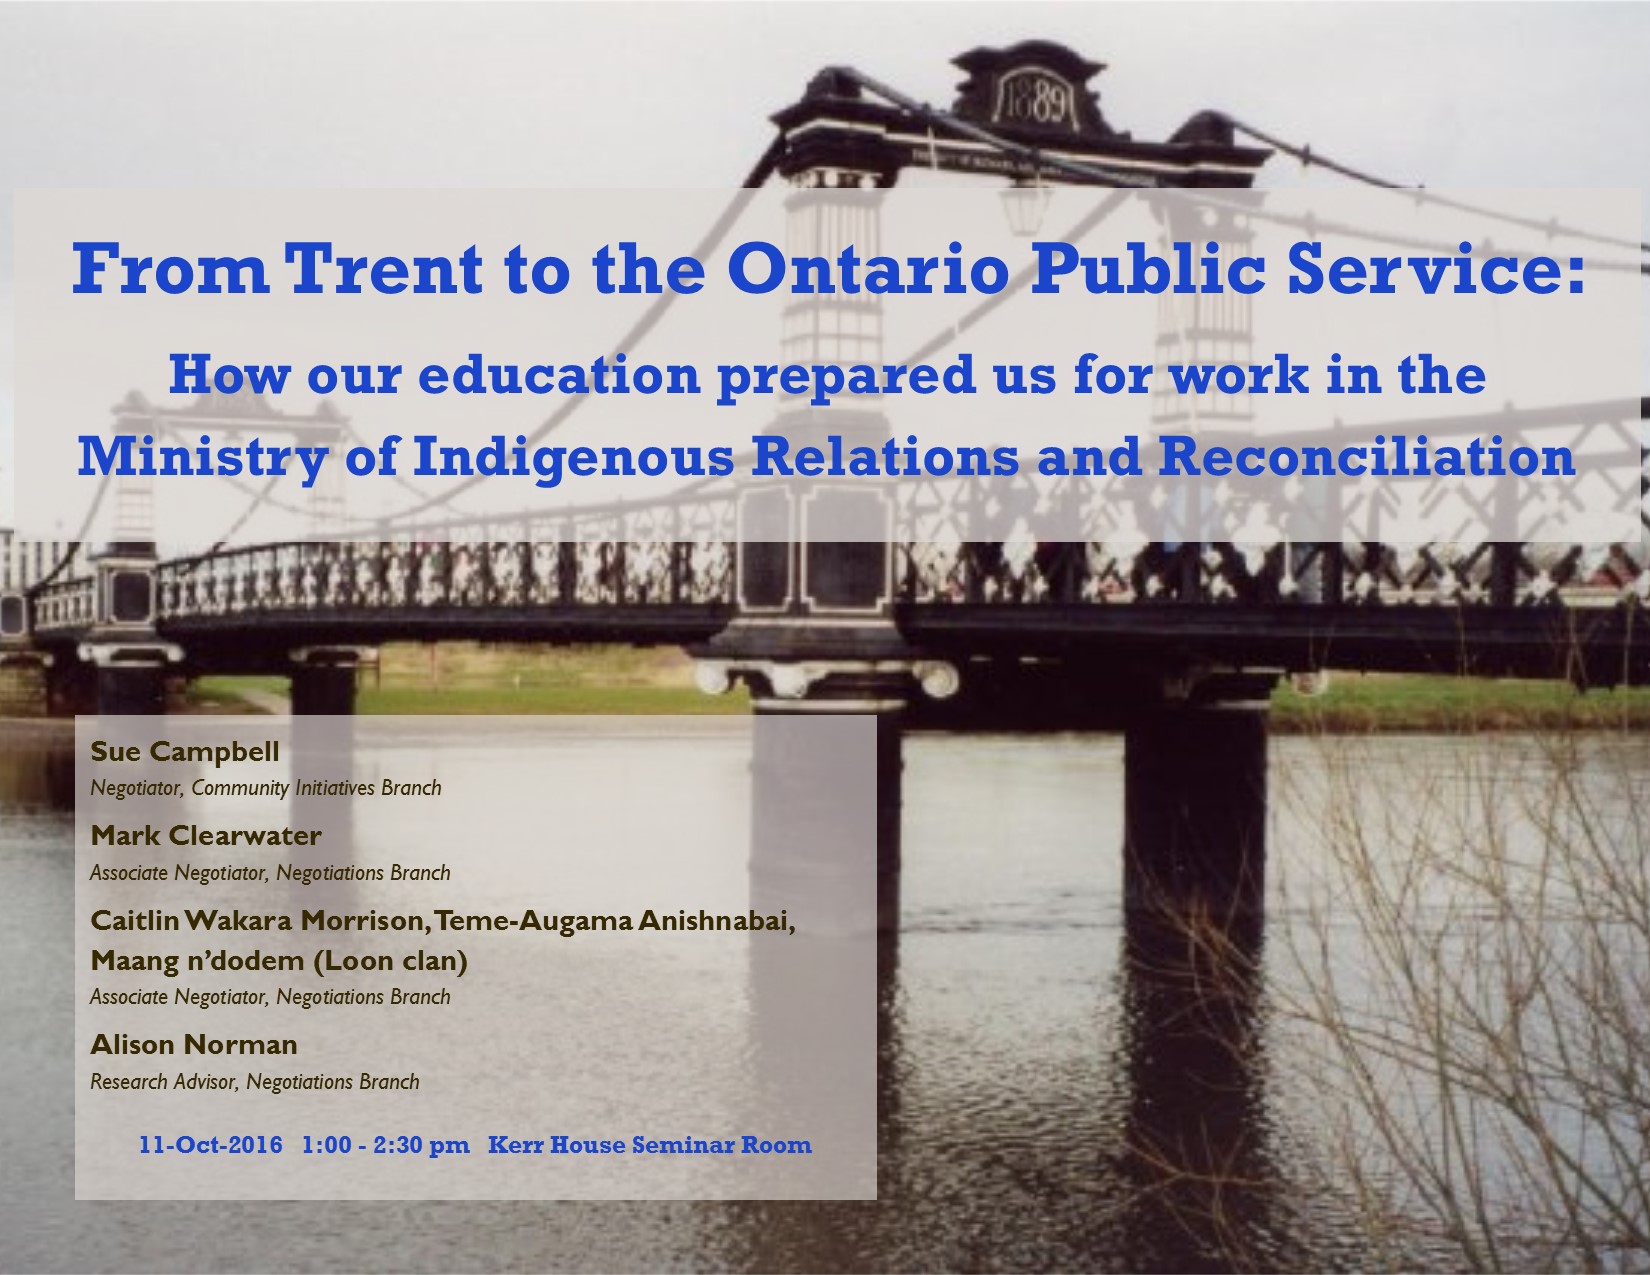 "From Trent to the Ontario Public Service" 11 October 2016